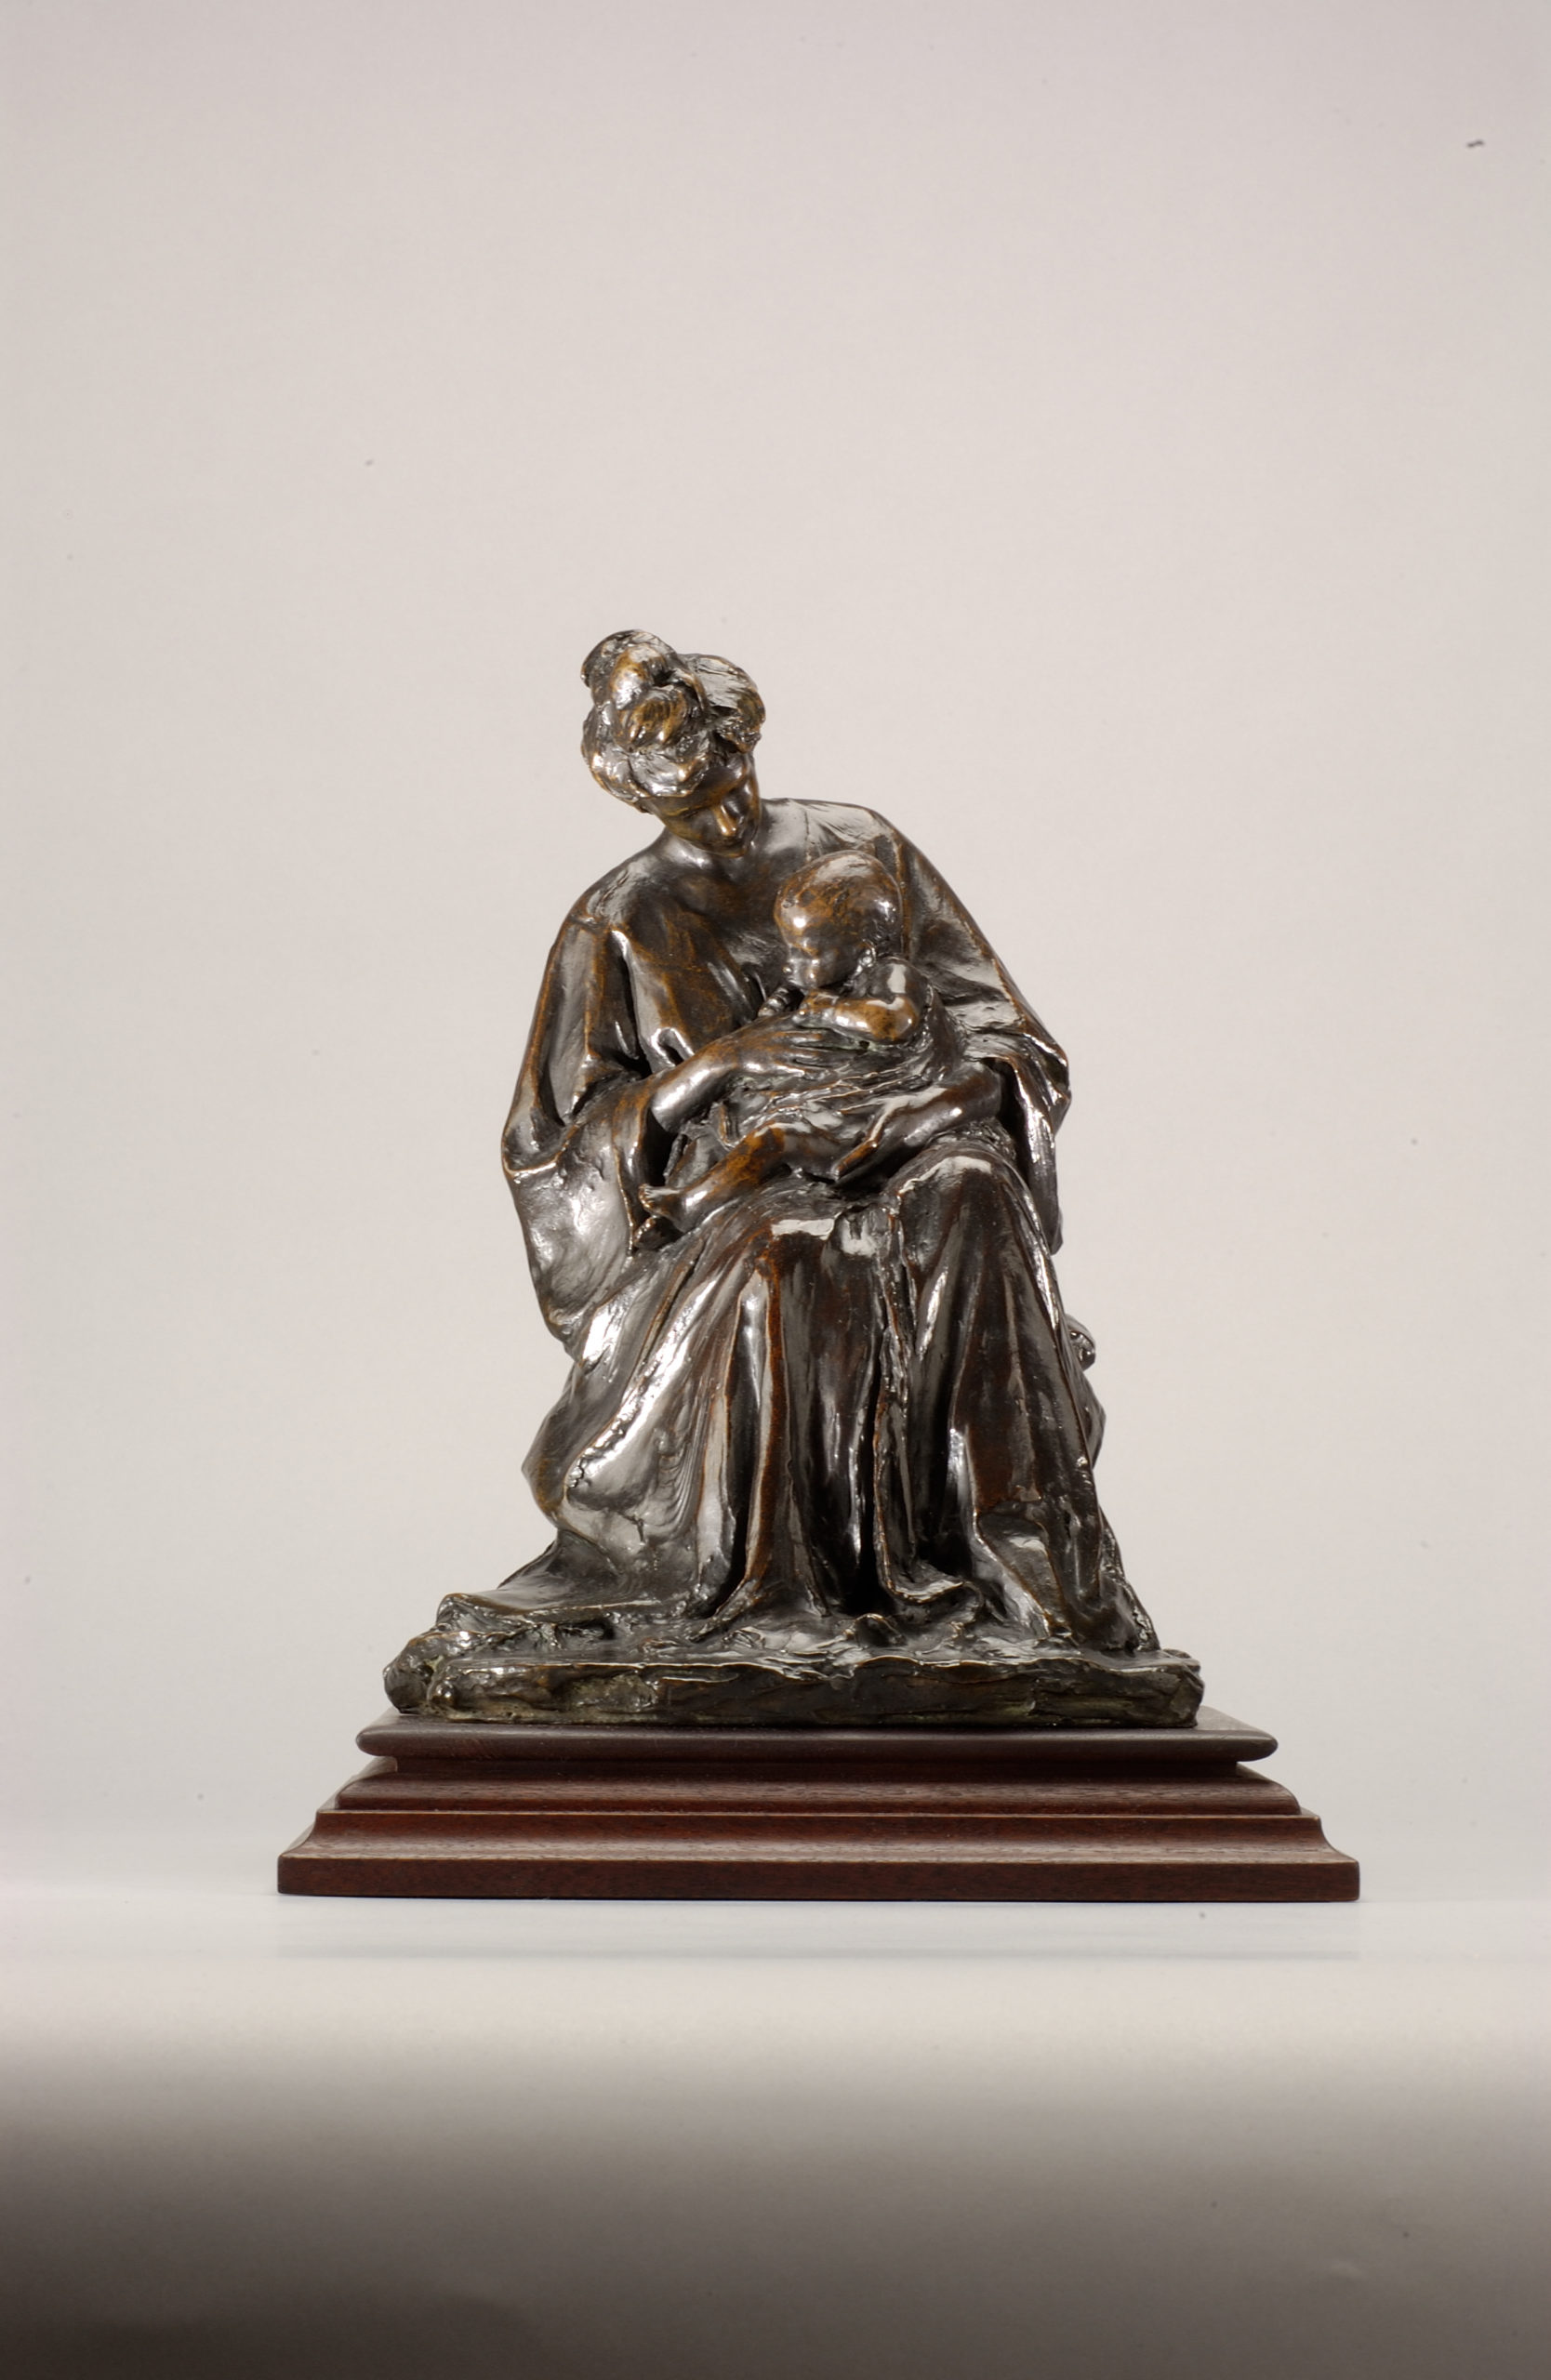 

											American Figurative  </b>

											<em>
												Now on view in New York</em> 

											<h4>
																							</h4>

		                																																													<i>Bessie Potter Vonnoh,</i>  
																																								Mother and Child, ca. 1902, 
																																								Bronze, 
																																								10 x 9 1⁄2 inches on original wood base 
																								
		                				